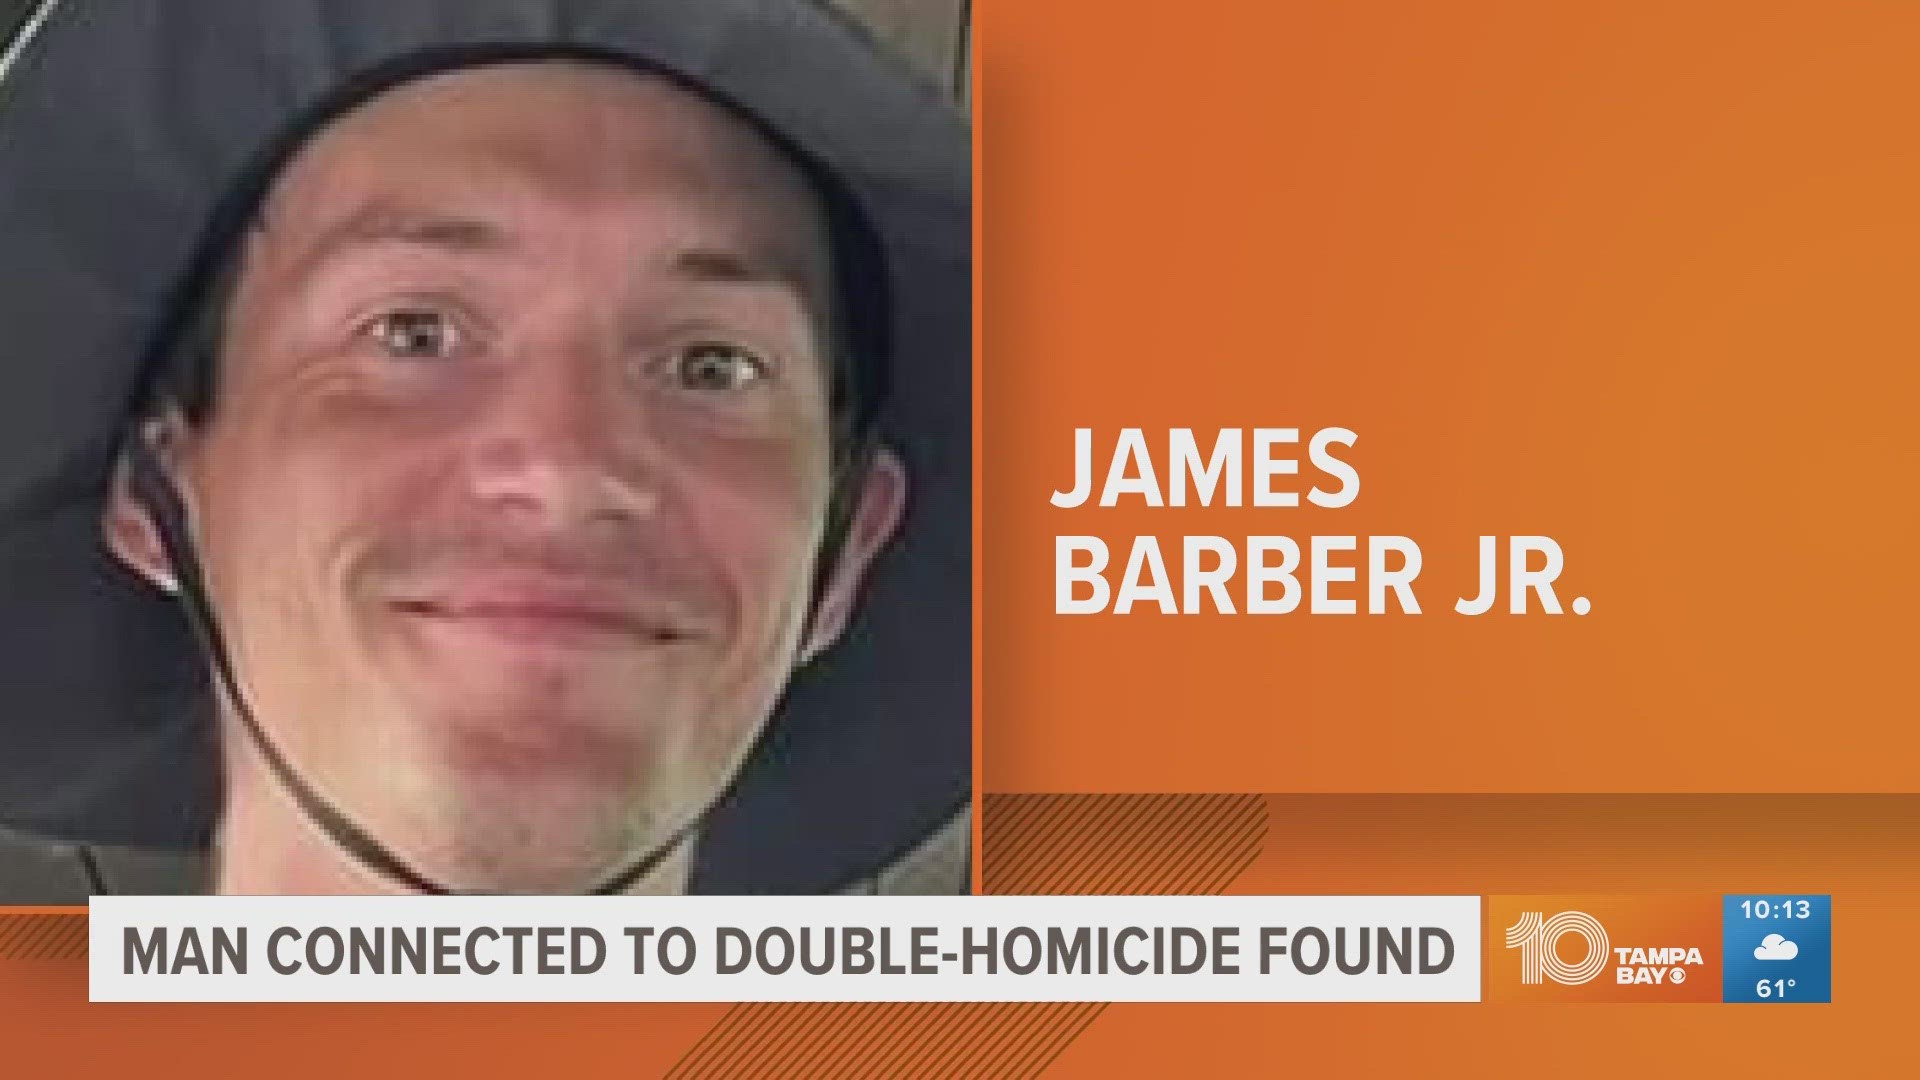 James Barber, Jr. is now facing two counts of first-degree murder, according to the sheriff's office.